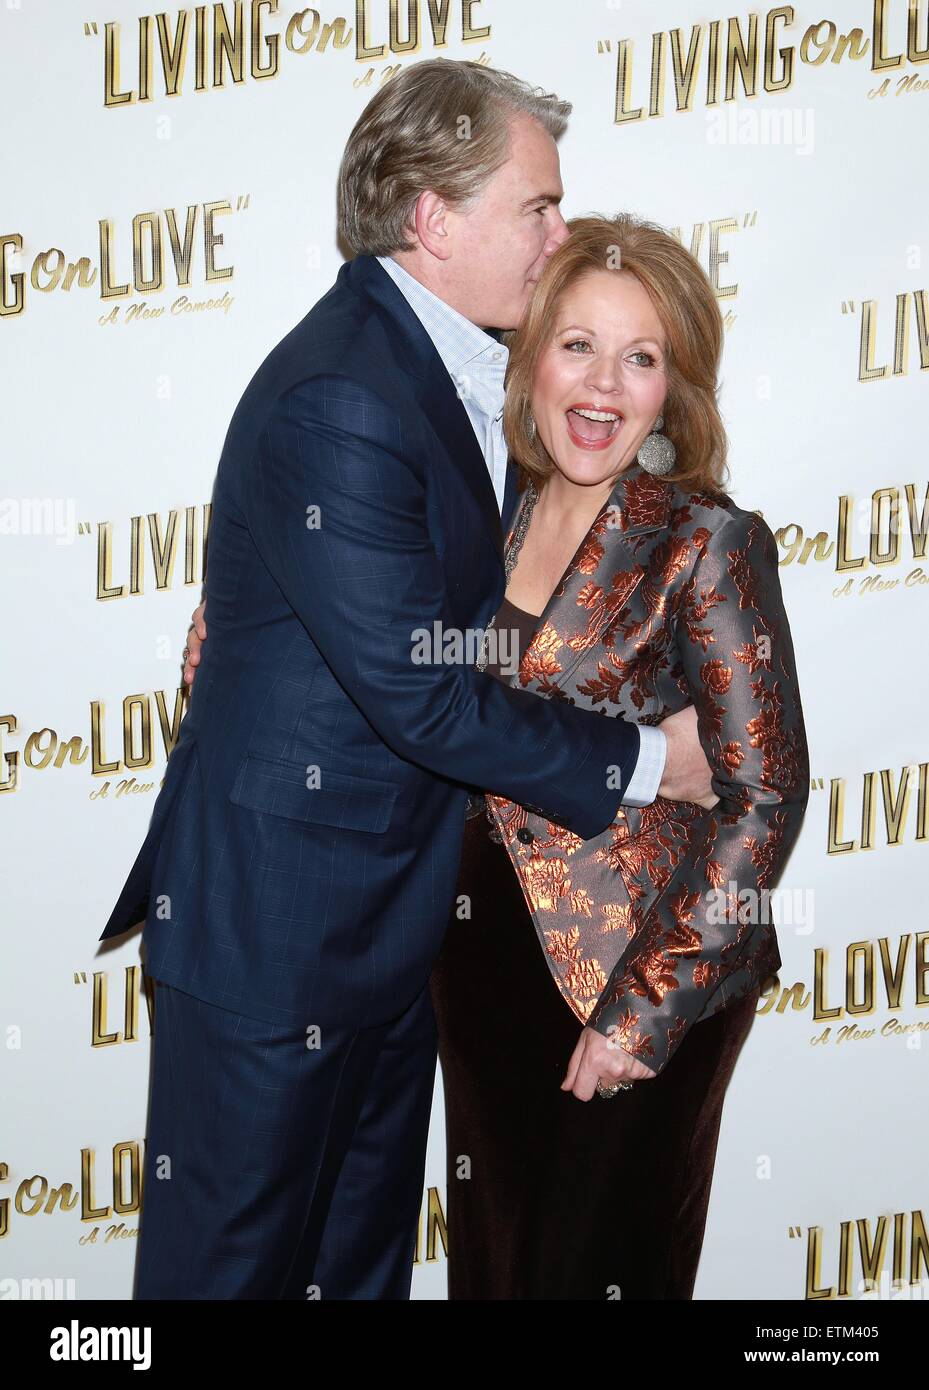 Press junket for Broadway play Living On Love held at the Empire Hotel.  Featuring: Douglas Sills, Renée Fleming Where: New York City, New York, United States When: 12 Mar 2015 Credit: Joseph Marzullo/WENN.com Stock Photo